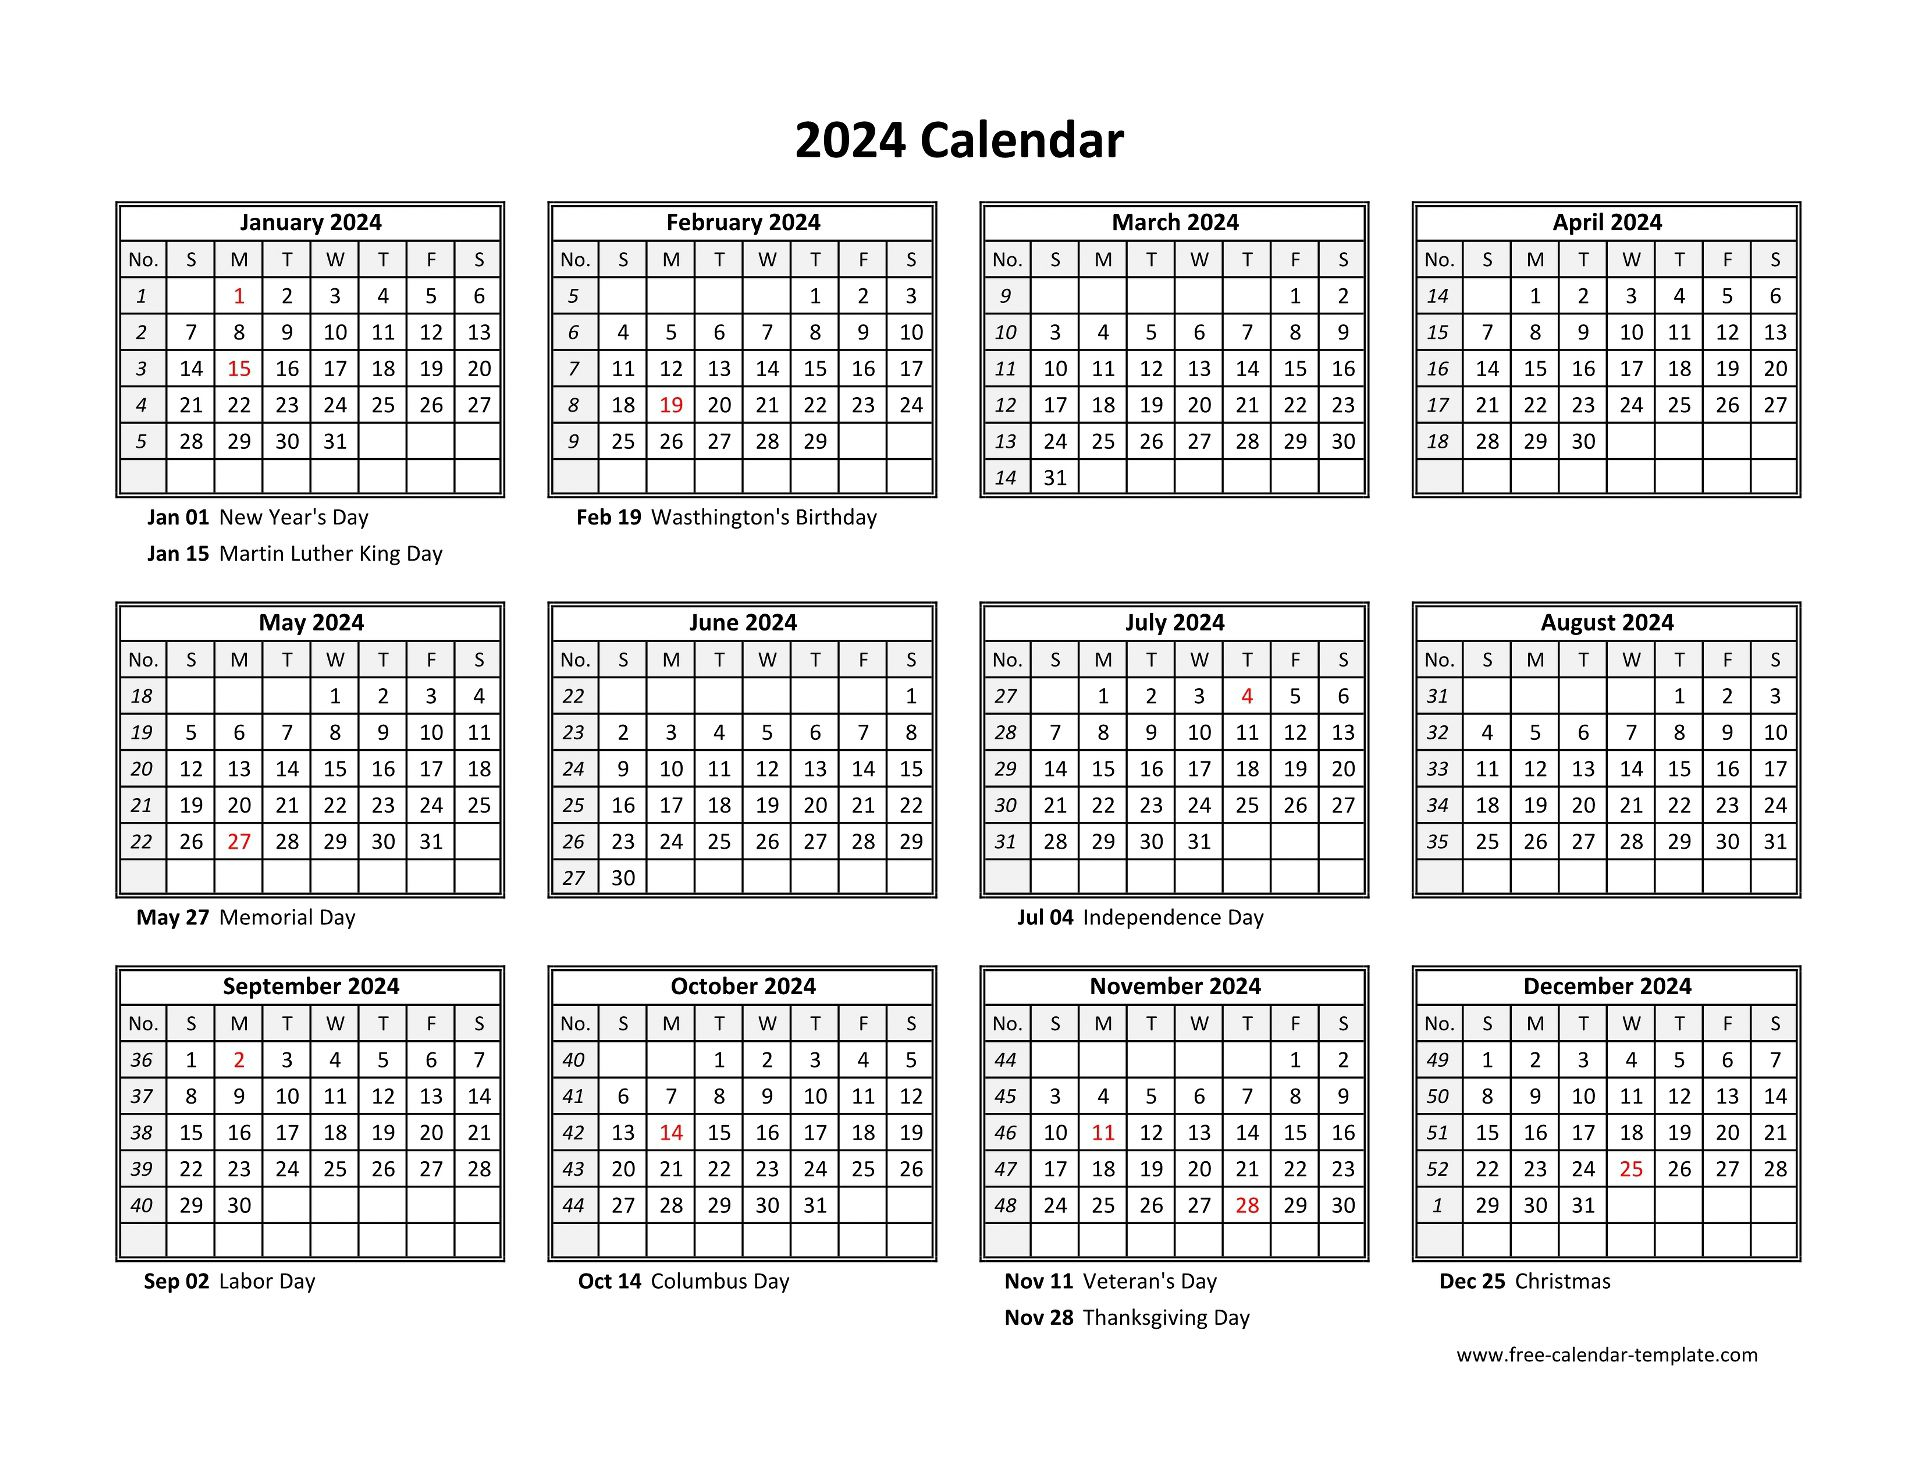 Yearly Calendar 2024 Printable With Federal Holidays | Free for 2024 Calendar Printable Template